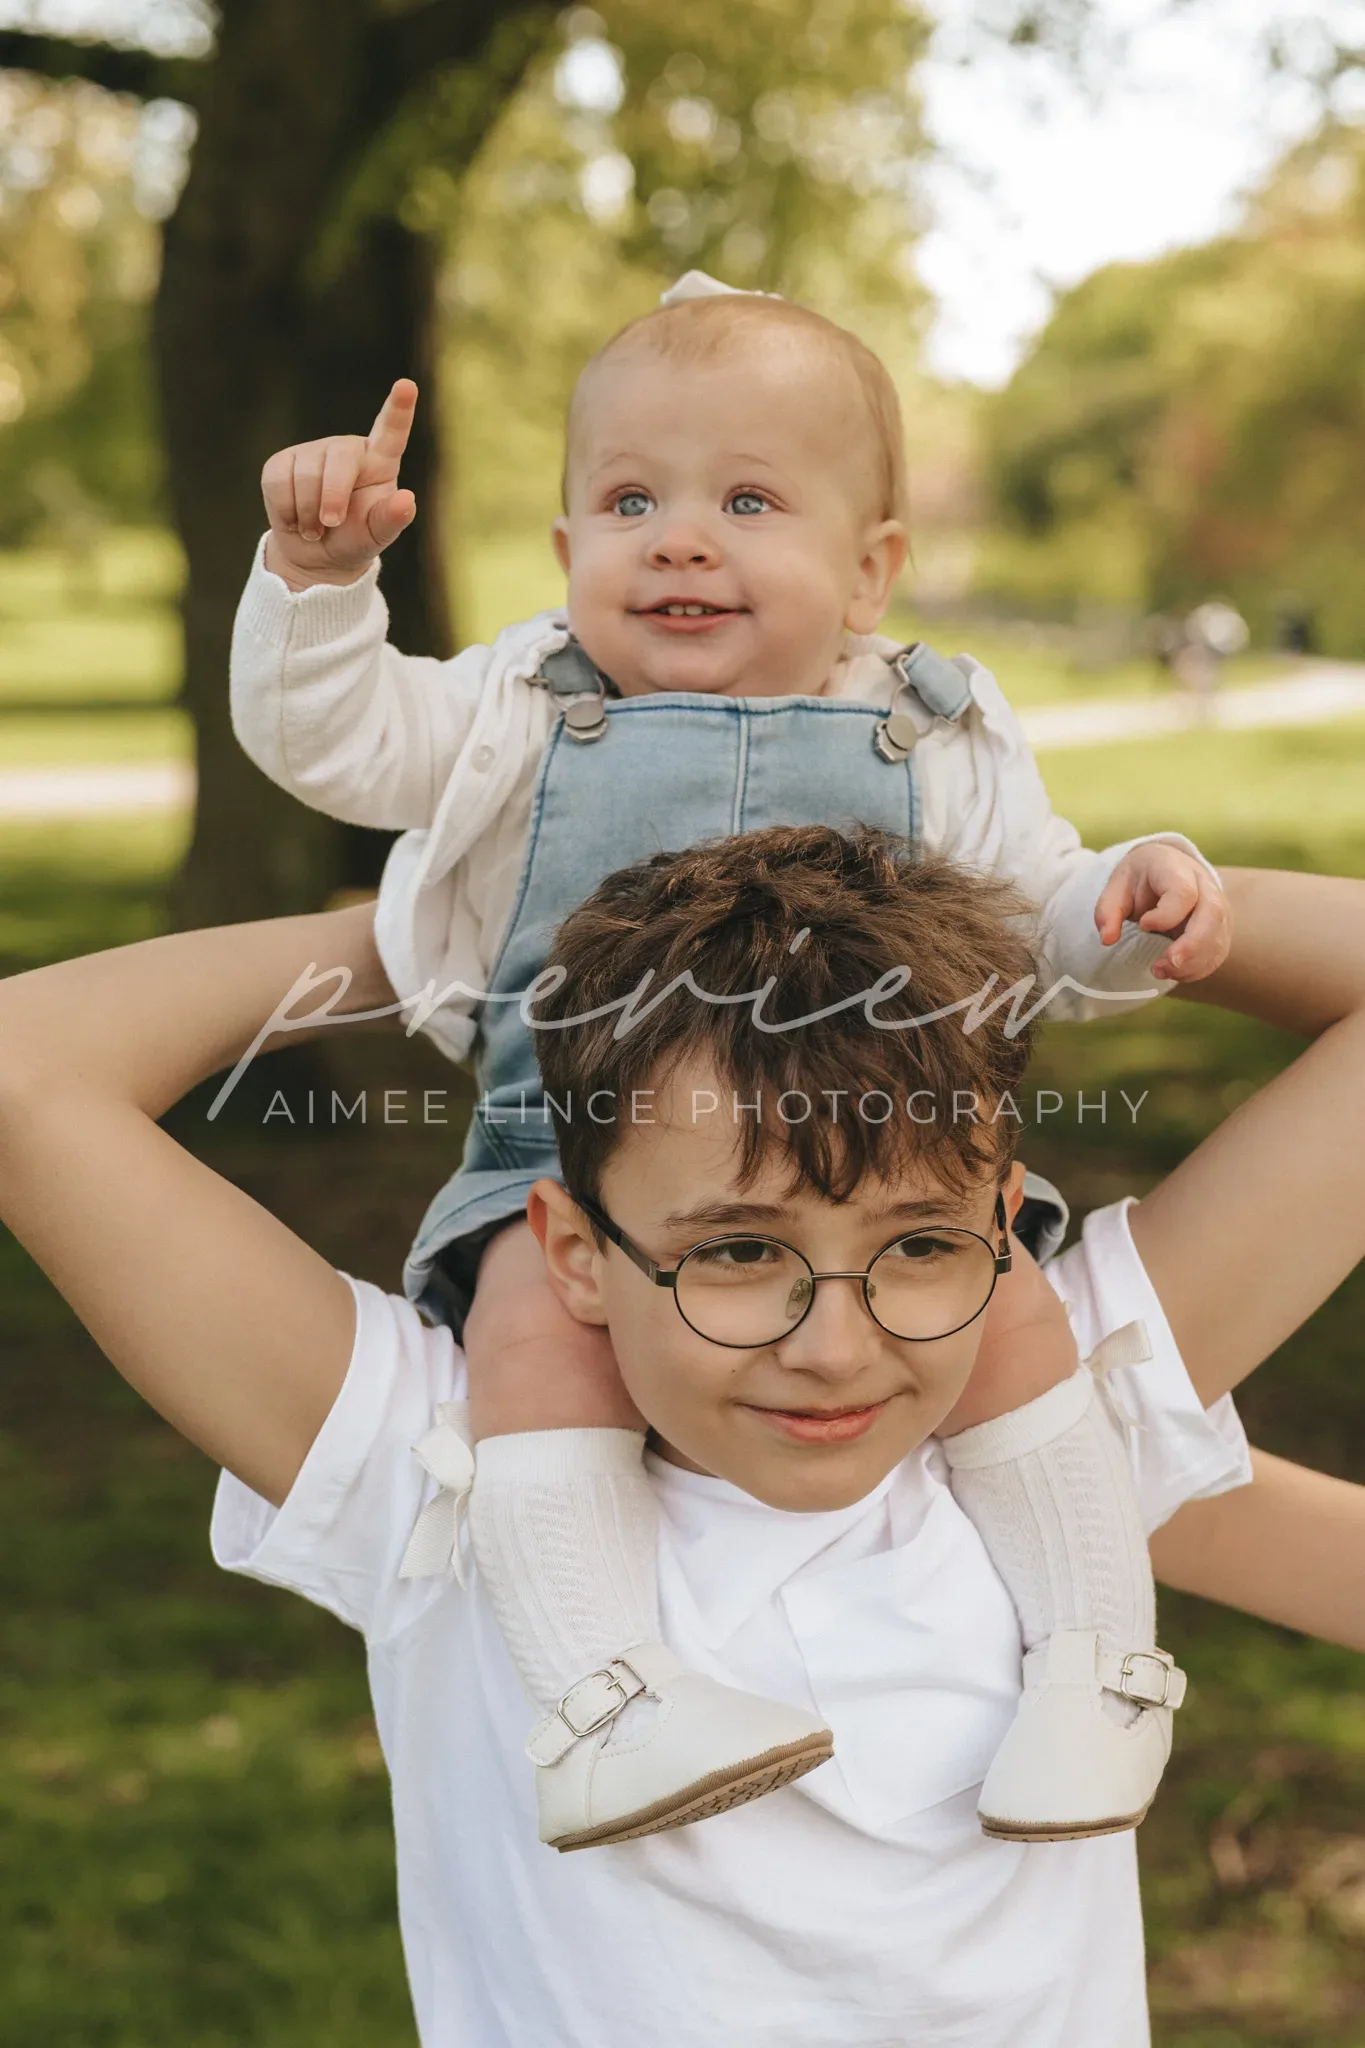 A joyful toddler sits on an older child's shoulders in a sunlit park. the toddler, dressed in overalls, points upwards, while the older child, wearing glasses and a white top, smiles broadly.